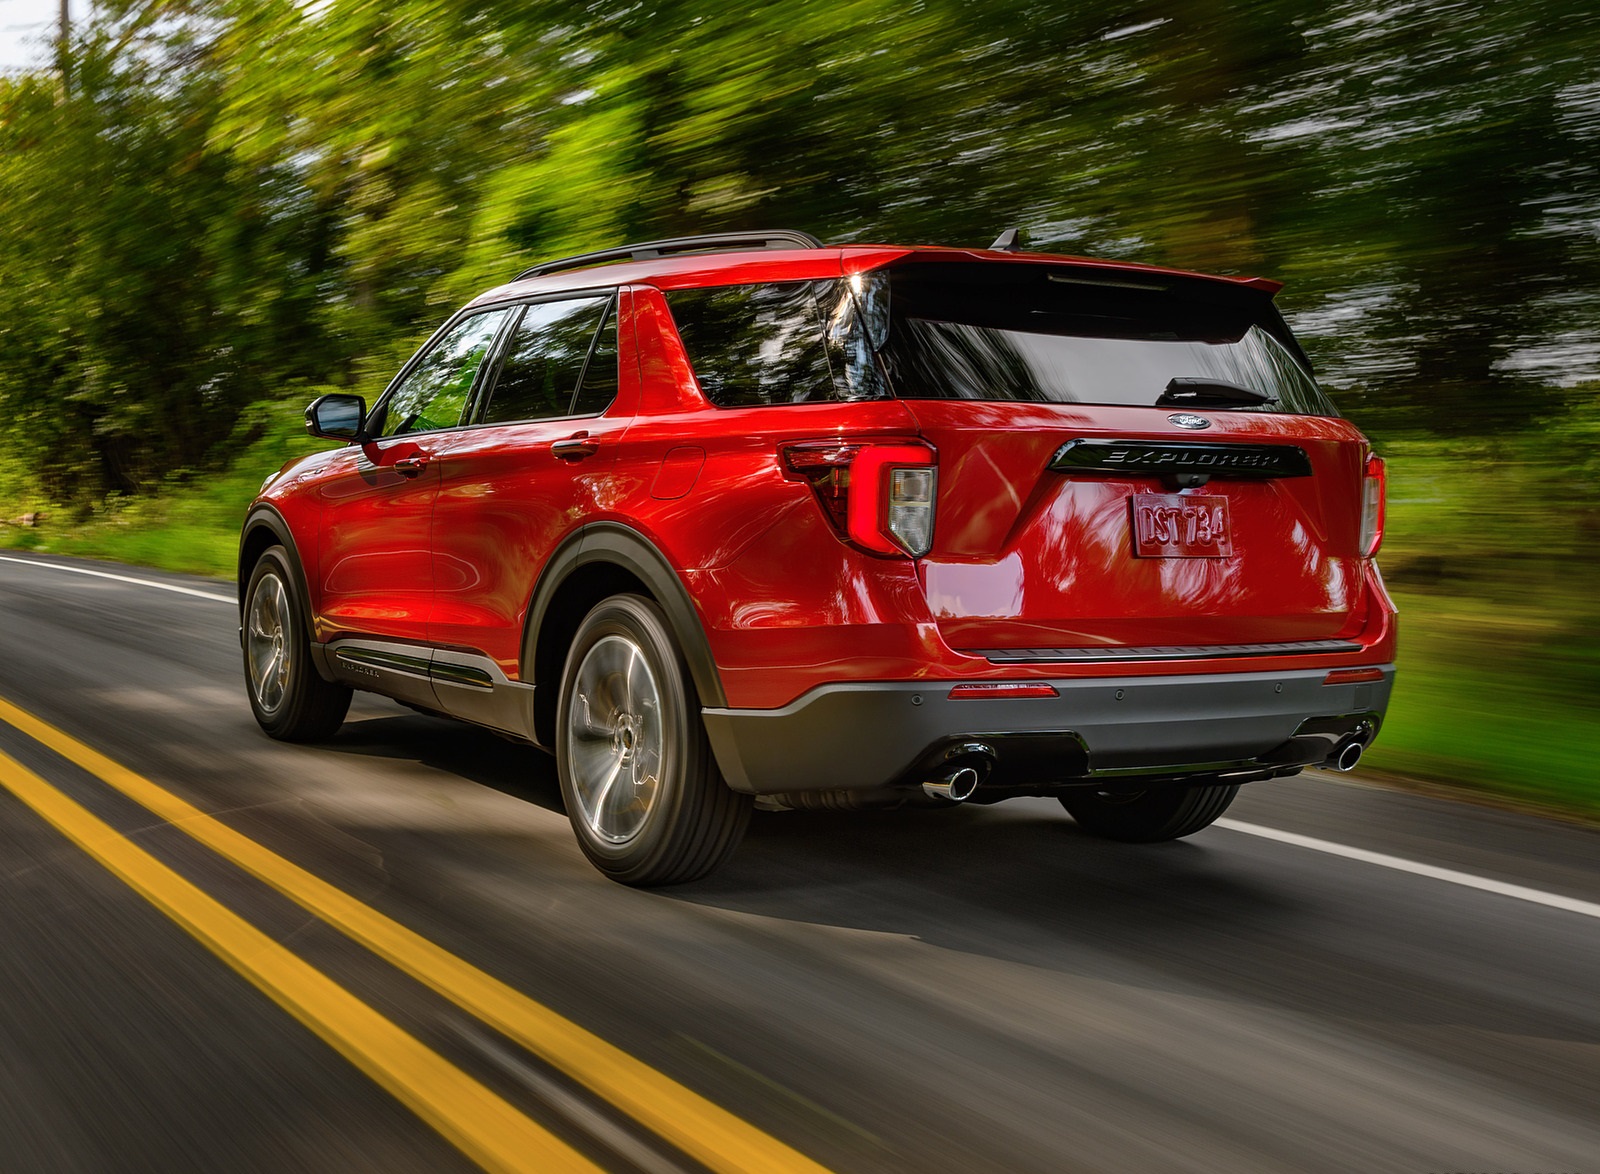 Ford Explorer St-Line Wallpapers